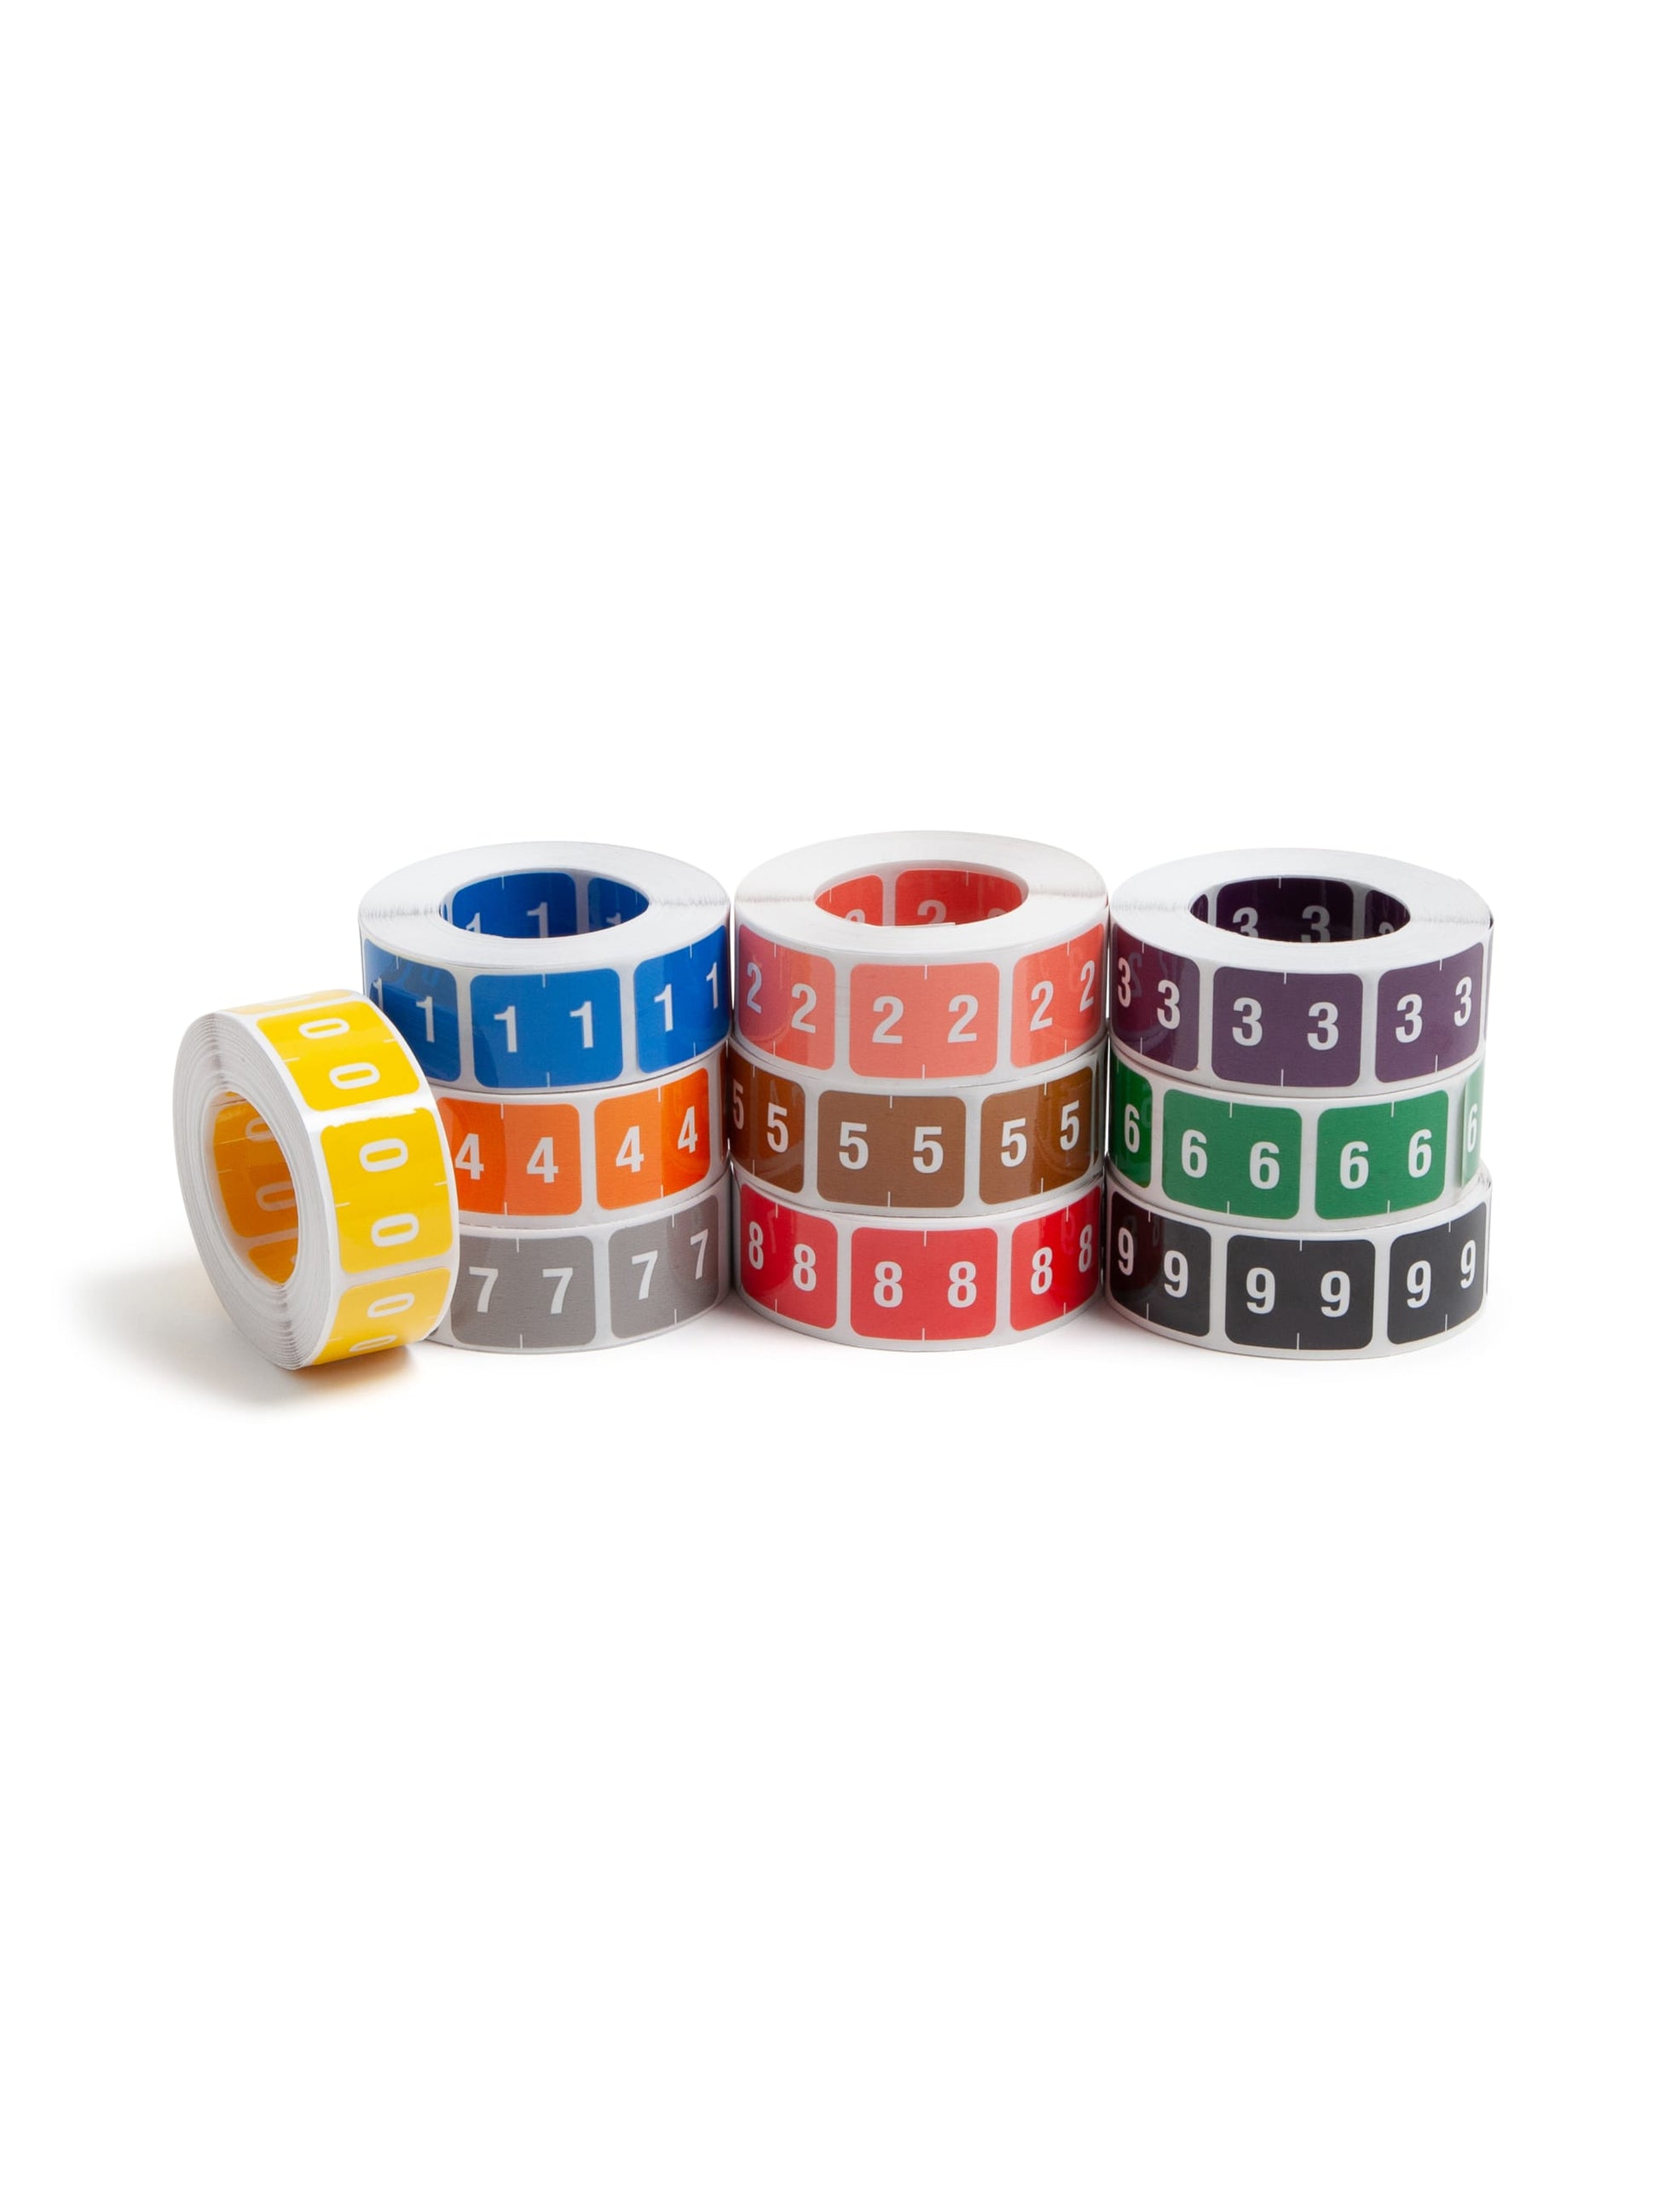 DCCRN Color-Coded Numeric Labels - Rolls, Assorted Colors Color, 1-1/4" X 1" Size, Set of 1, 086486673501